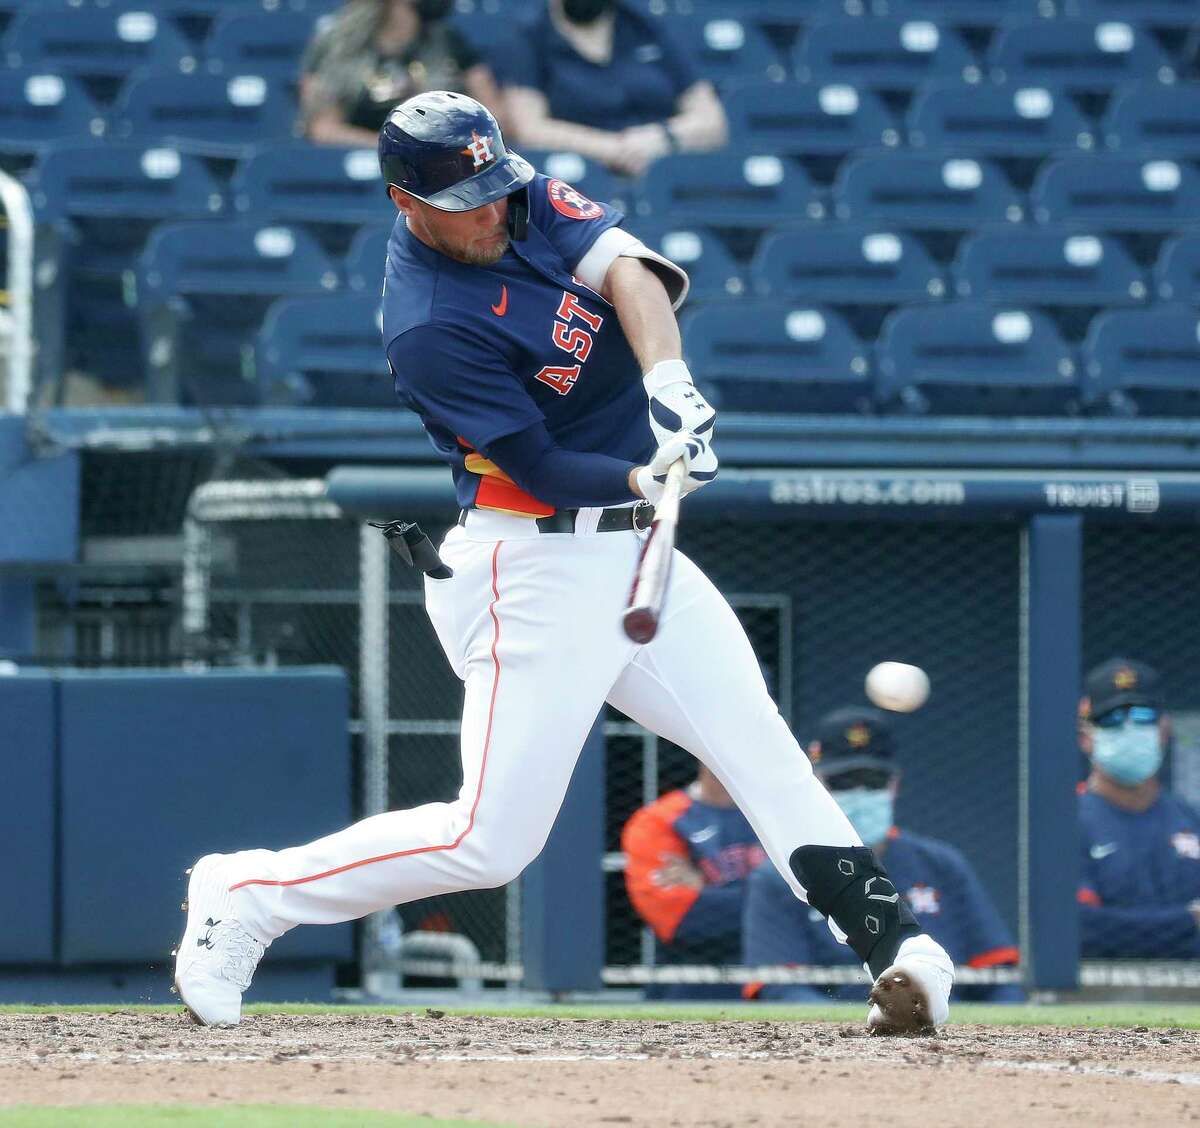 Astros minor leaguer Grae Kessinger improved at the plate during the second half of last season thanks to keeping things simple.